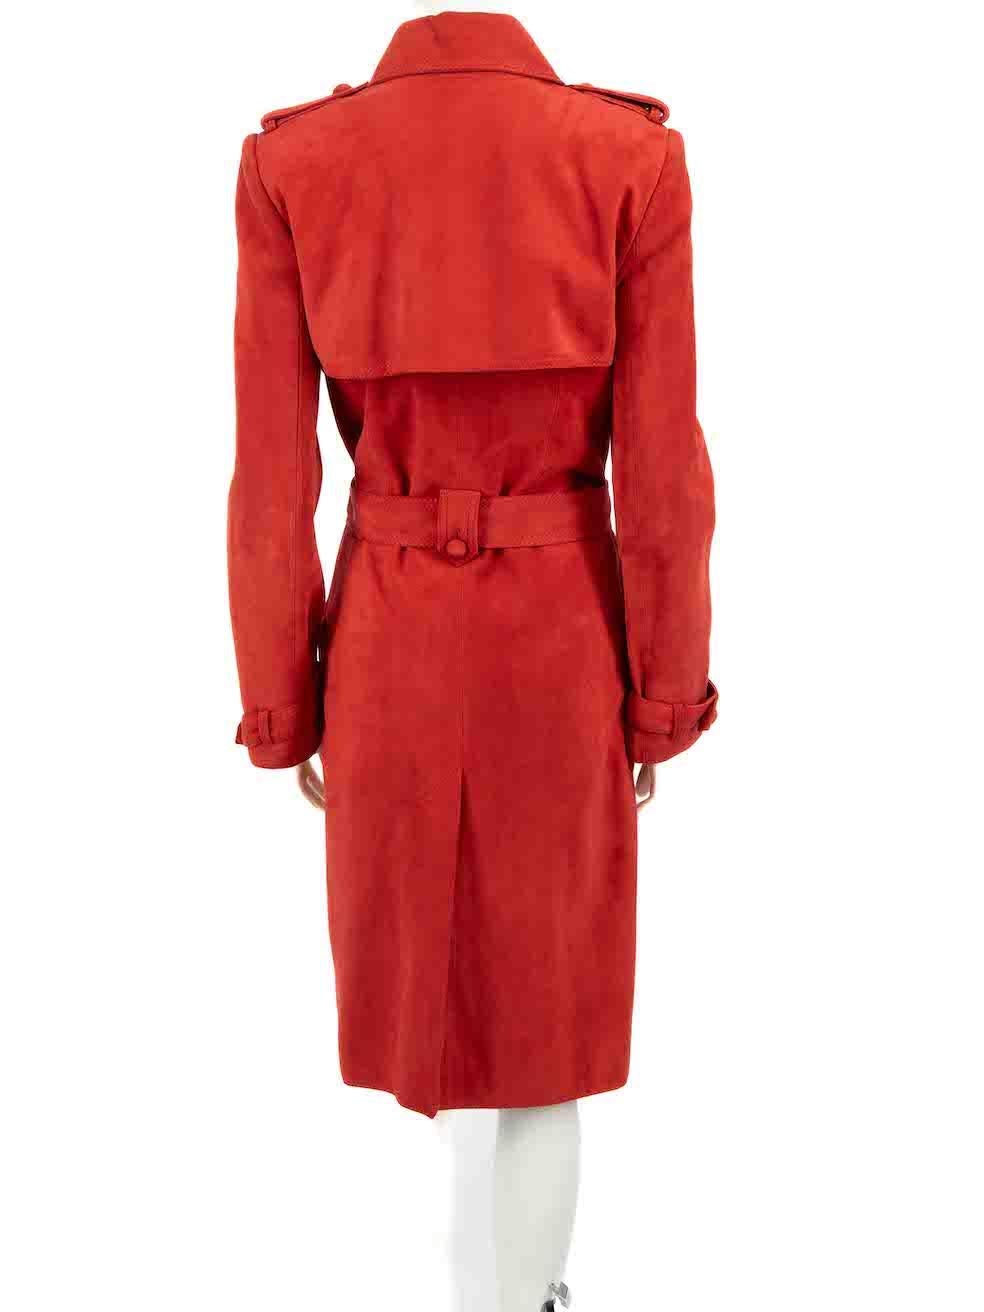 Givenchy Red Suede Double-Breasted Belted Coat Size M In Good Condition For Sale In London, GB